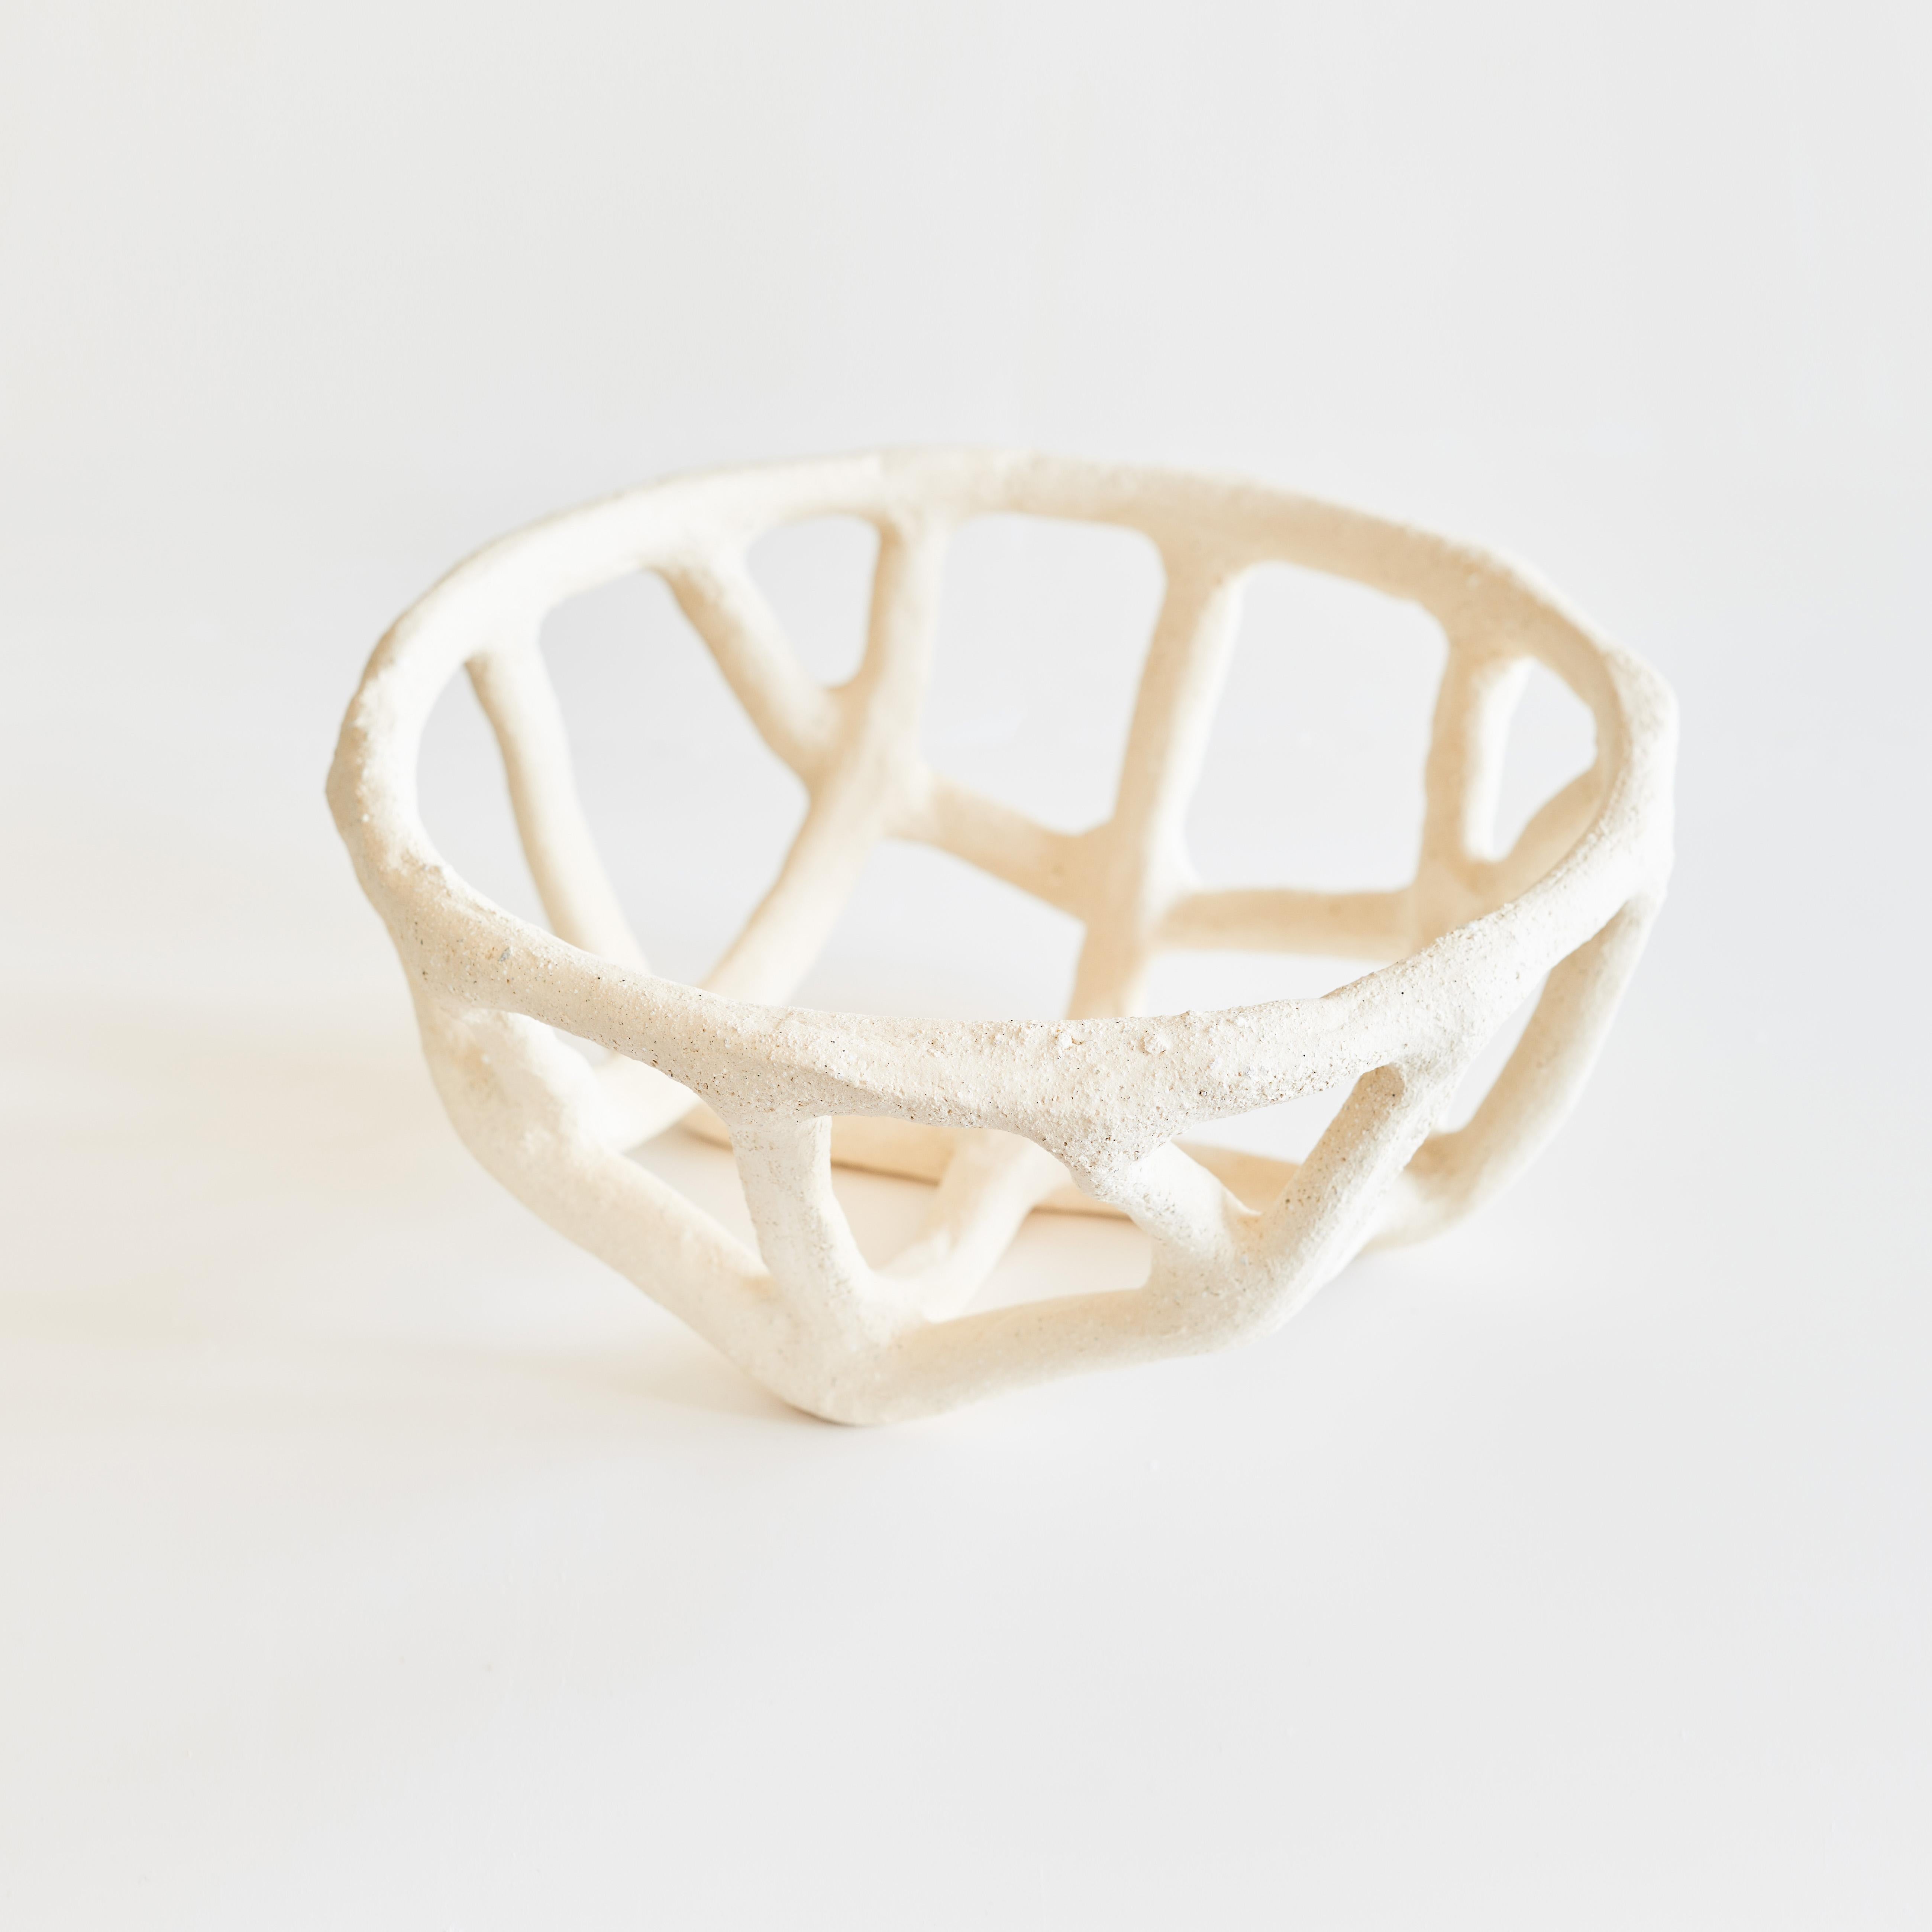 La Corbeille XIII small by Claire Pain 
Dimensions: D 25 x H 10 cm
Materials: Raw Stoneware

Fragility and delicacy arise from a raw material, in which strength and vigour intertwine to give shape to the singular work of Claire Pain.
Modeled